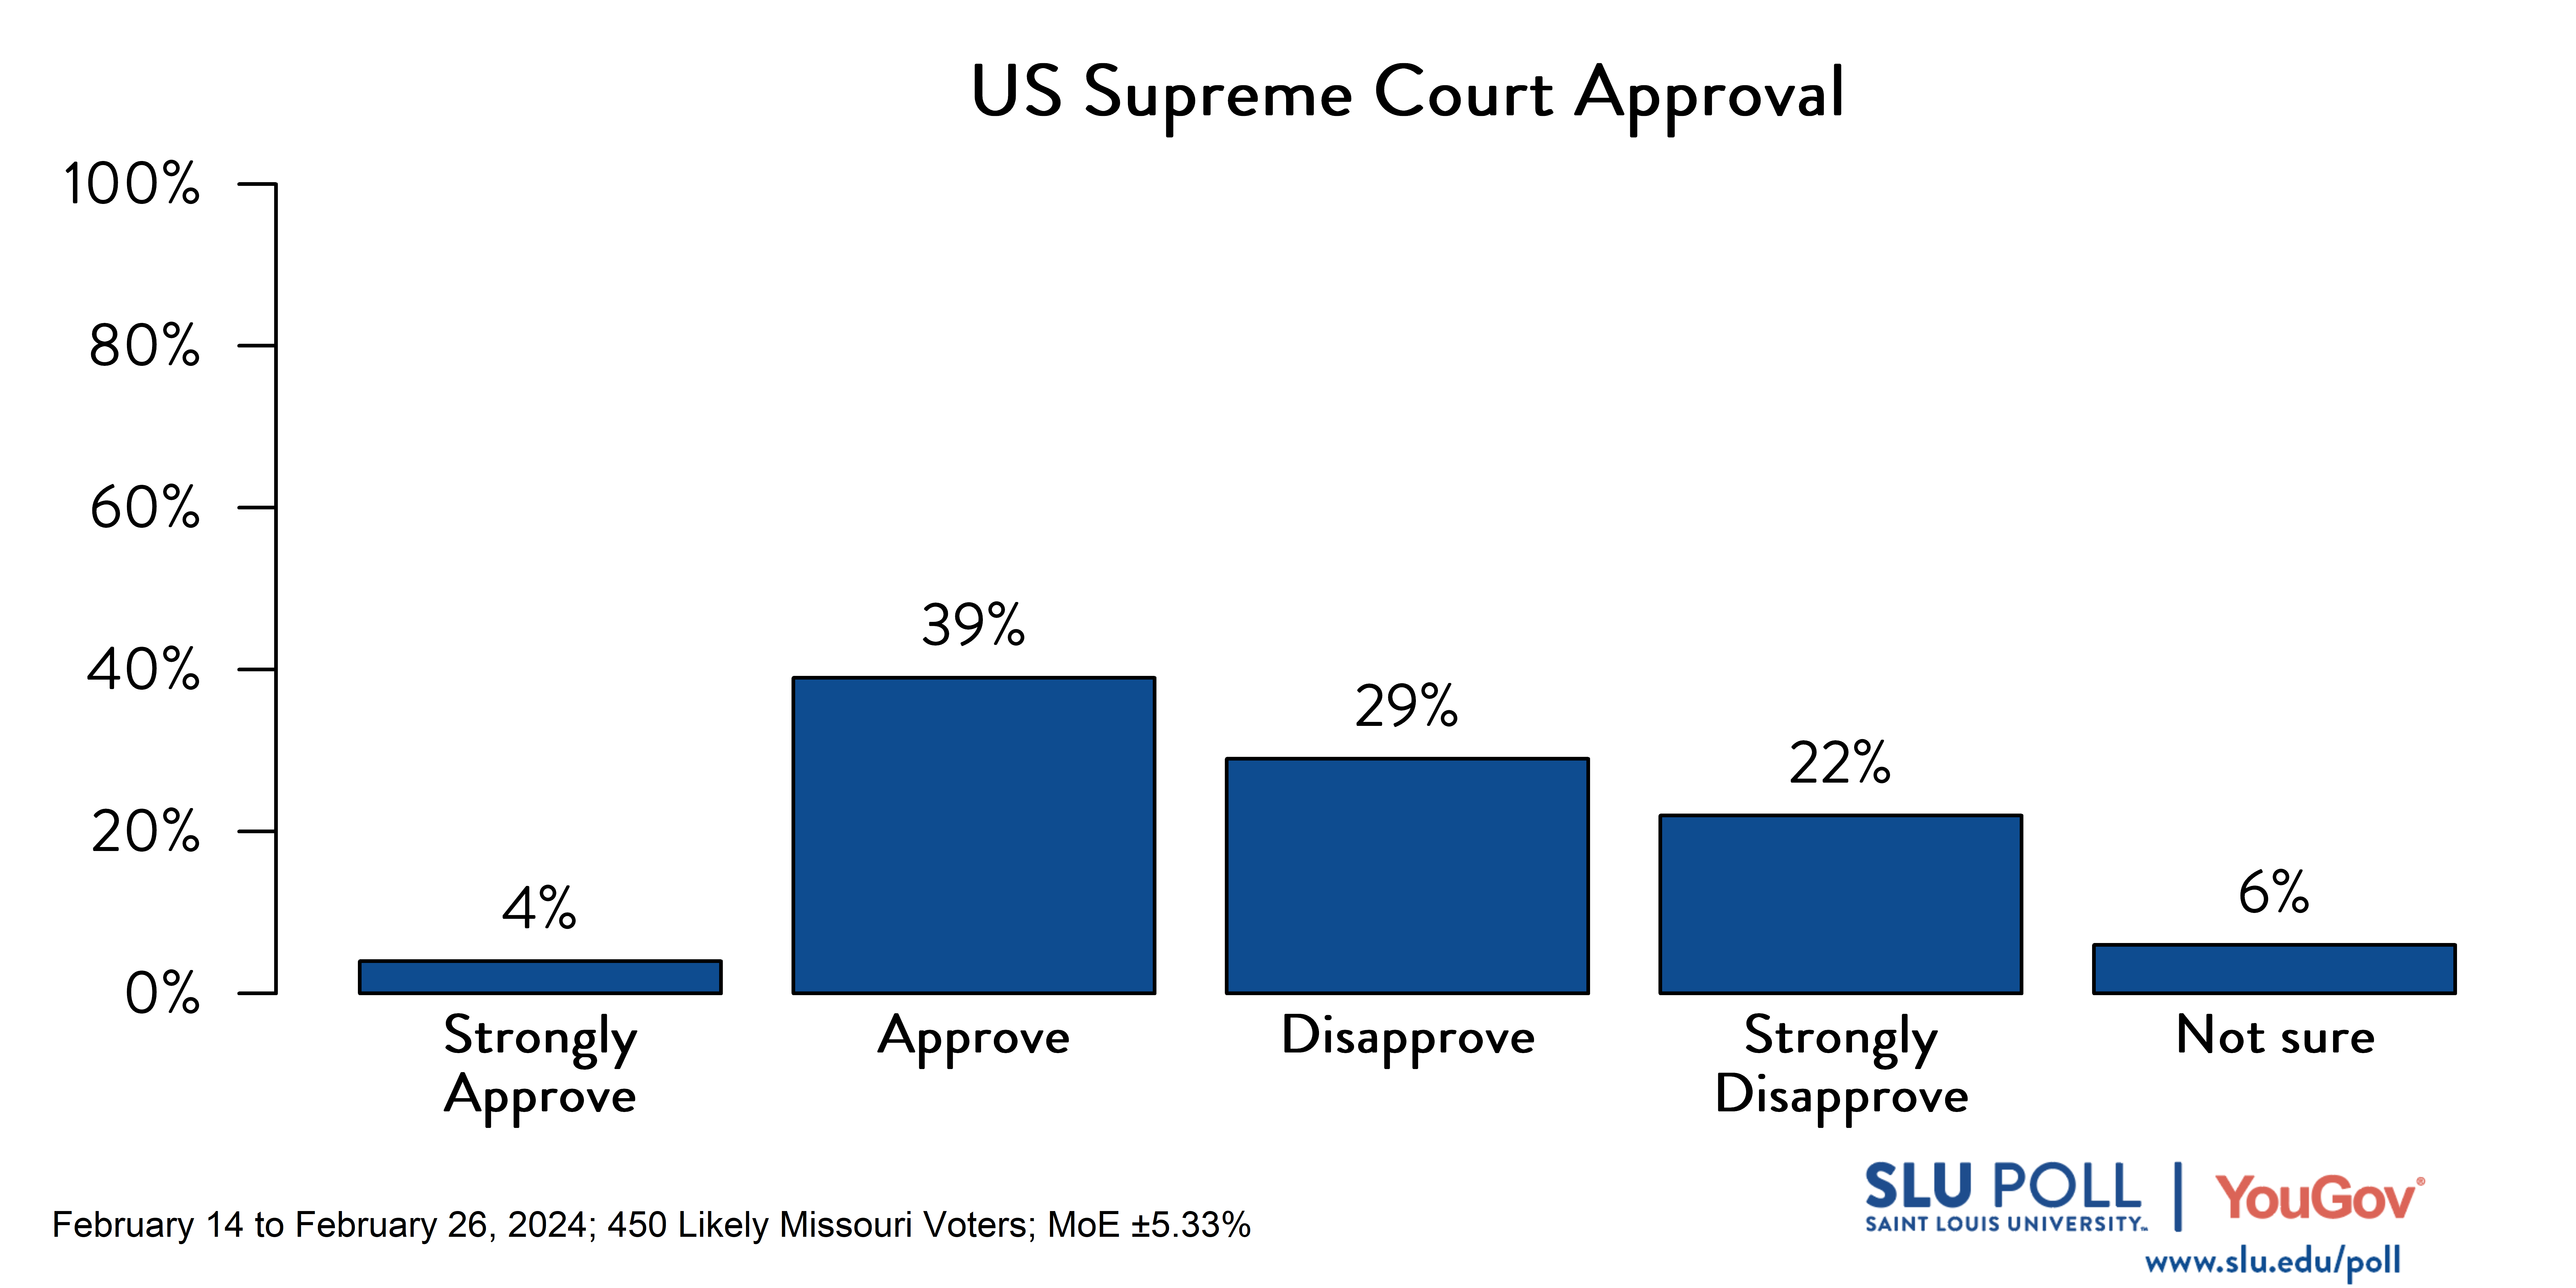 Bar graph of SLU/YouGov Poll results for US Supreme Court approval question. Results in caption